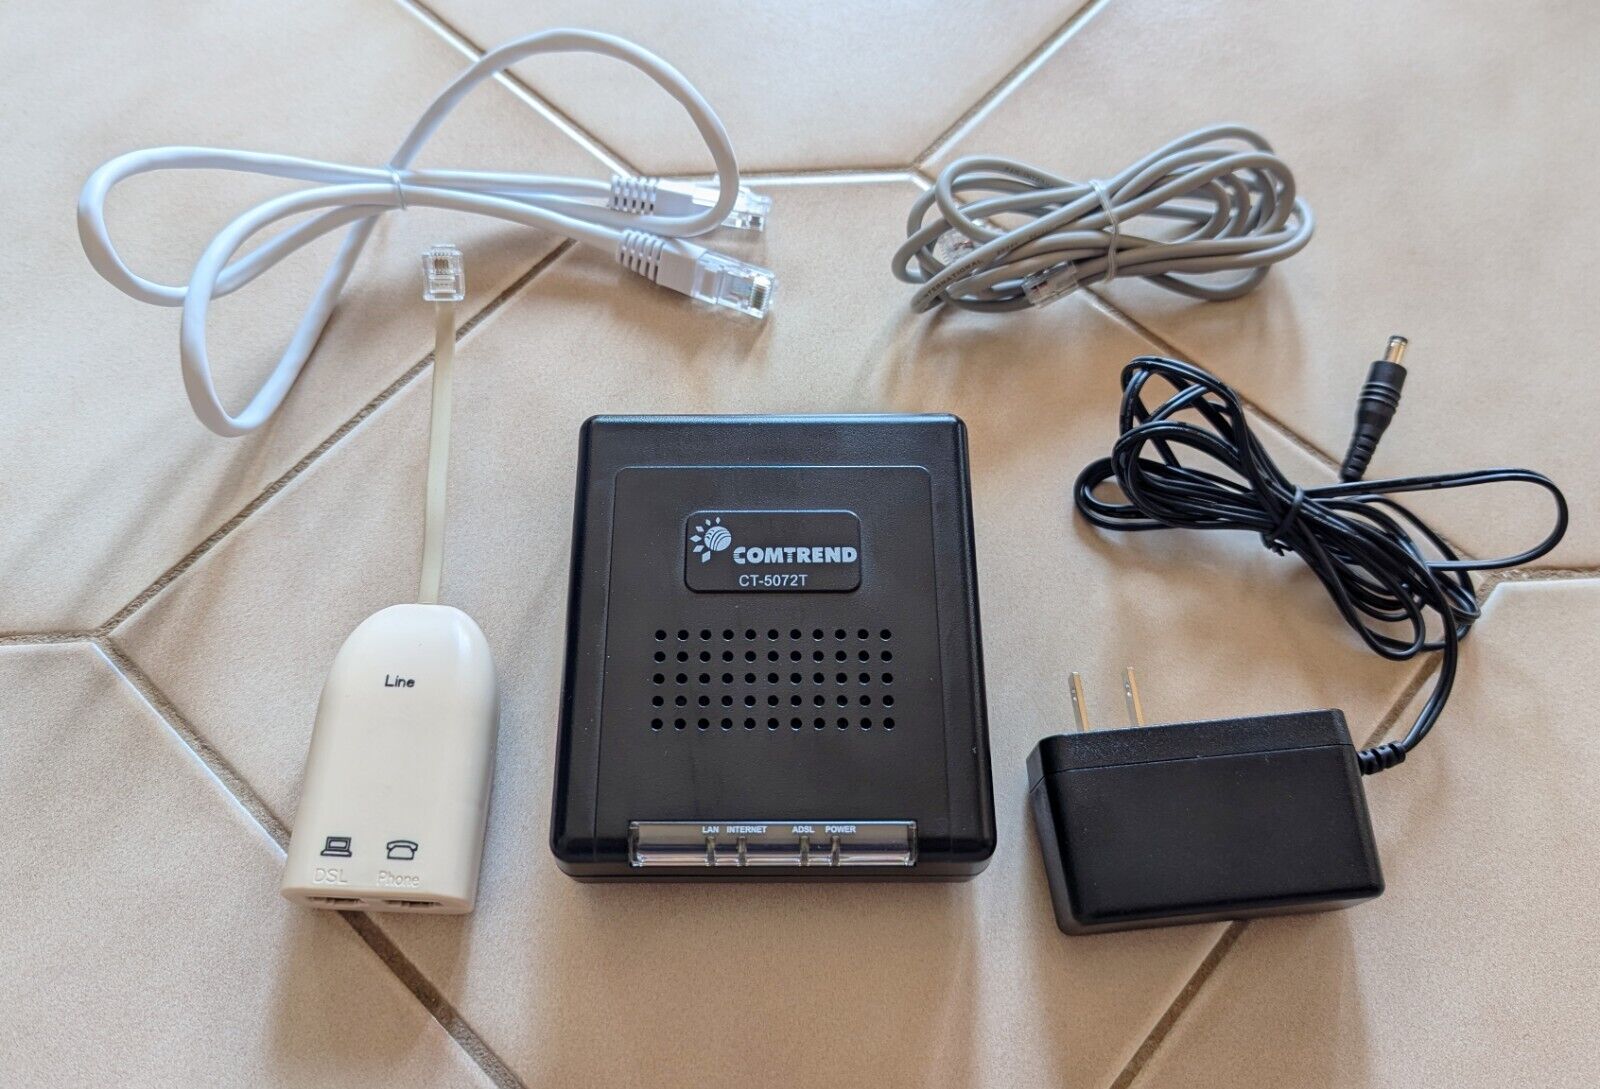 Comtrend 1-Port ADSL2+ Modem/Router - Model CT-5072T - Works Great, Accessories